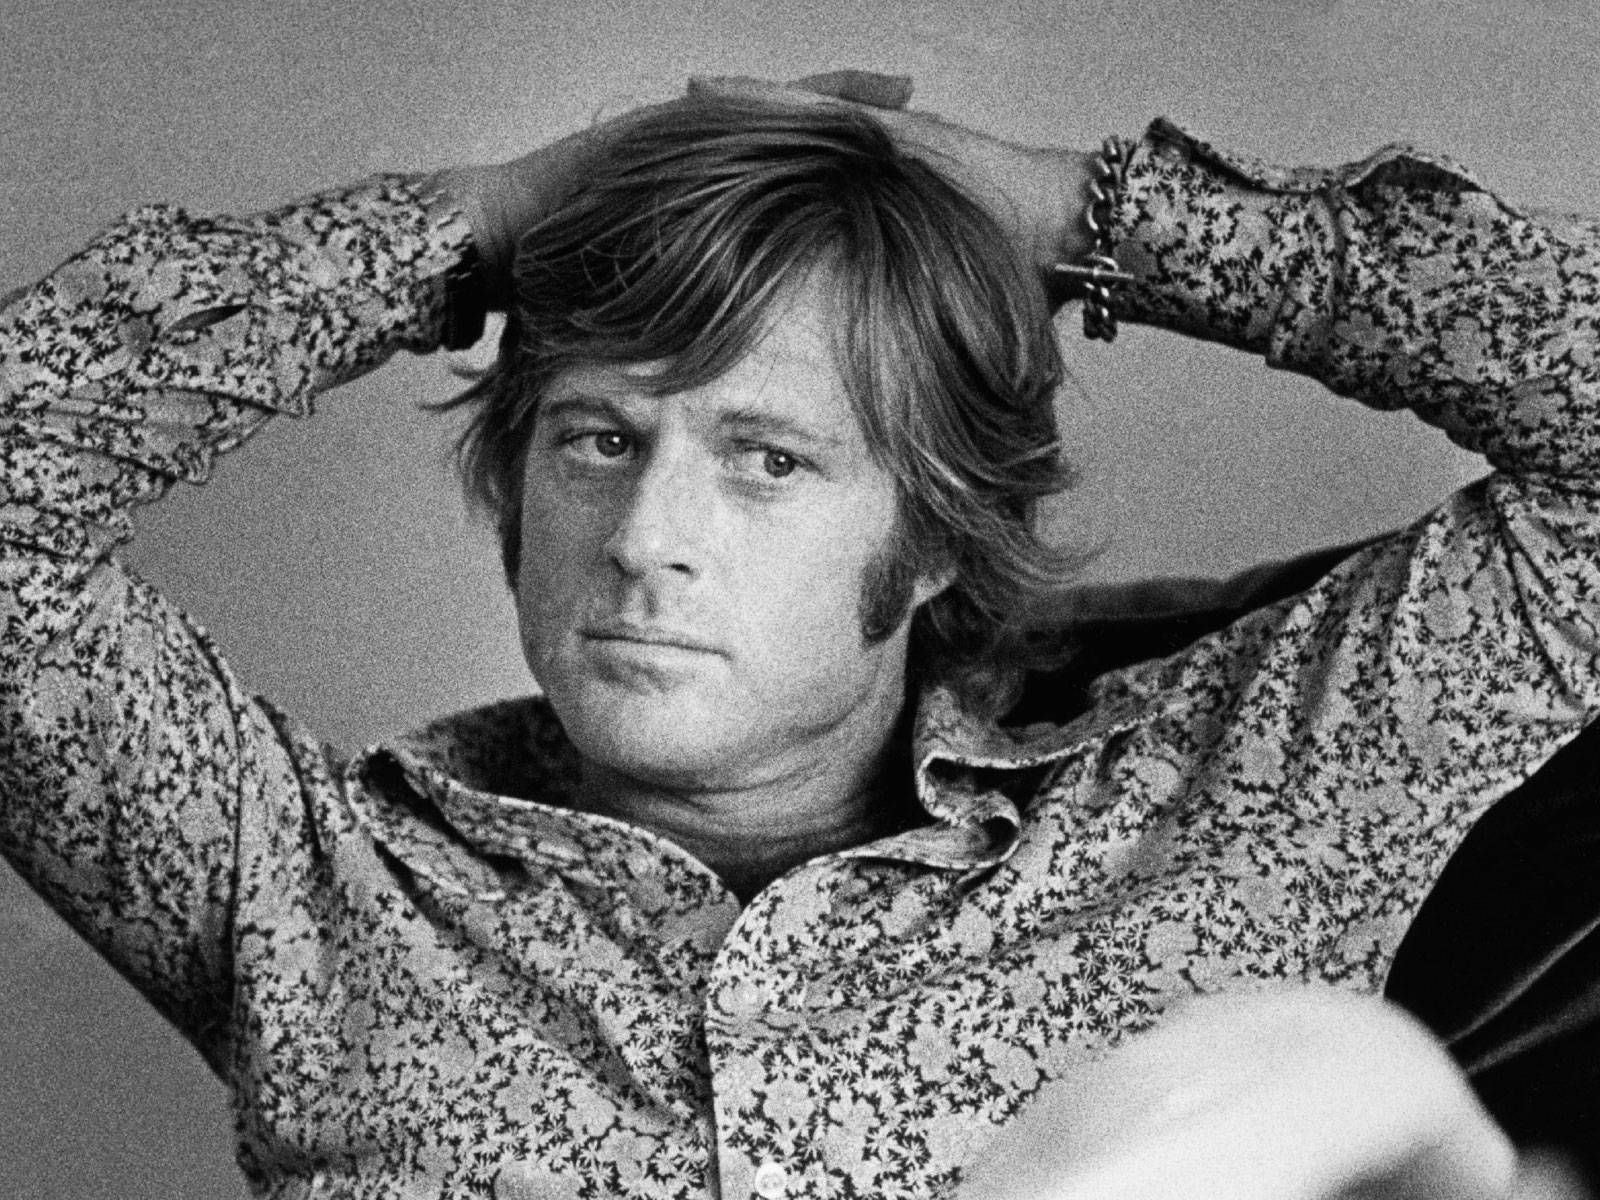 Robert Redford Hands On His Head Background